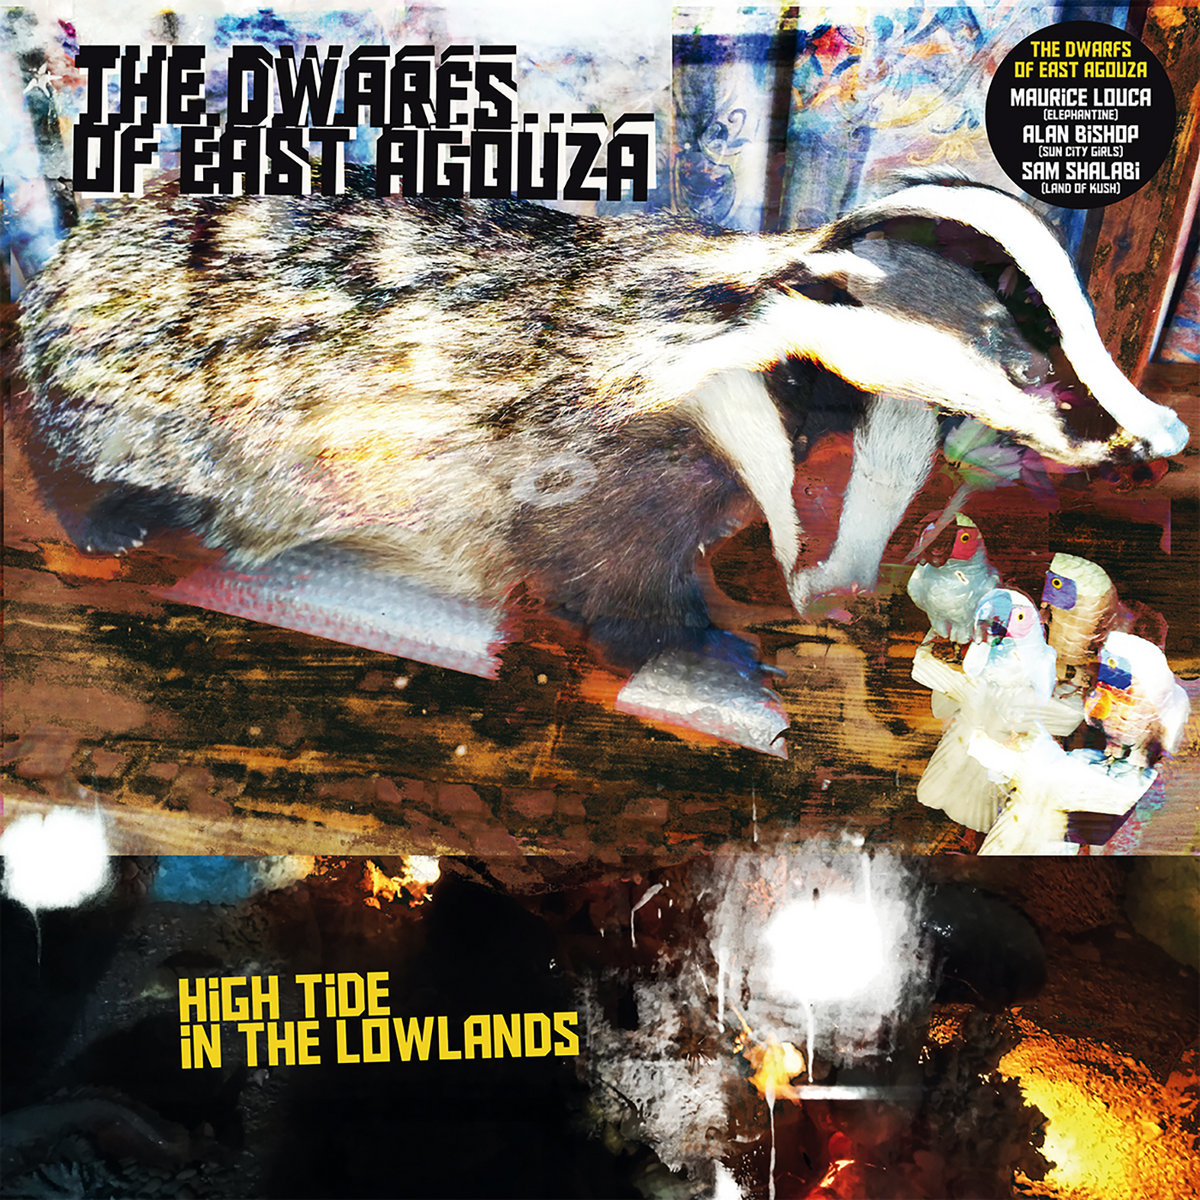 Hörenswert: The Dwarfs of East Agouza - “High Tide In The Lowlands”